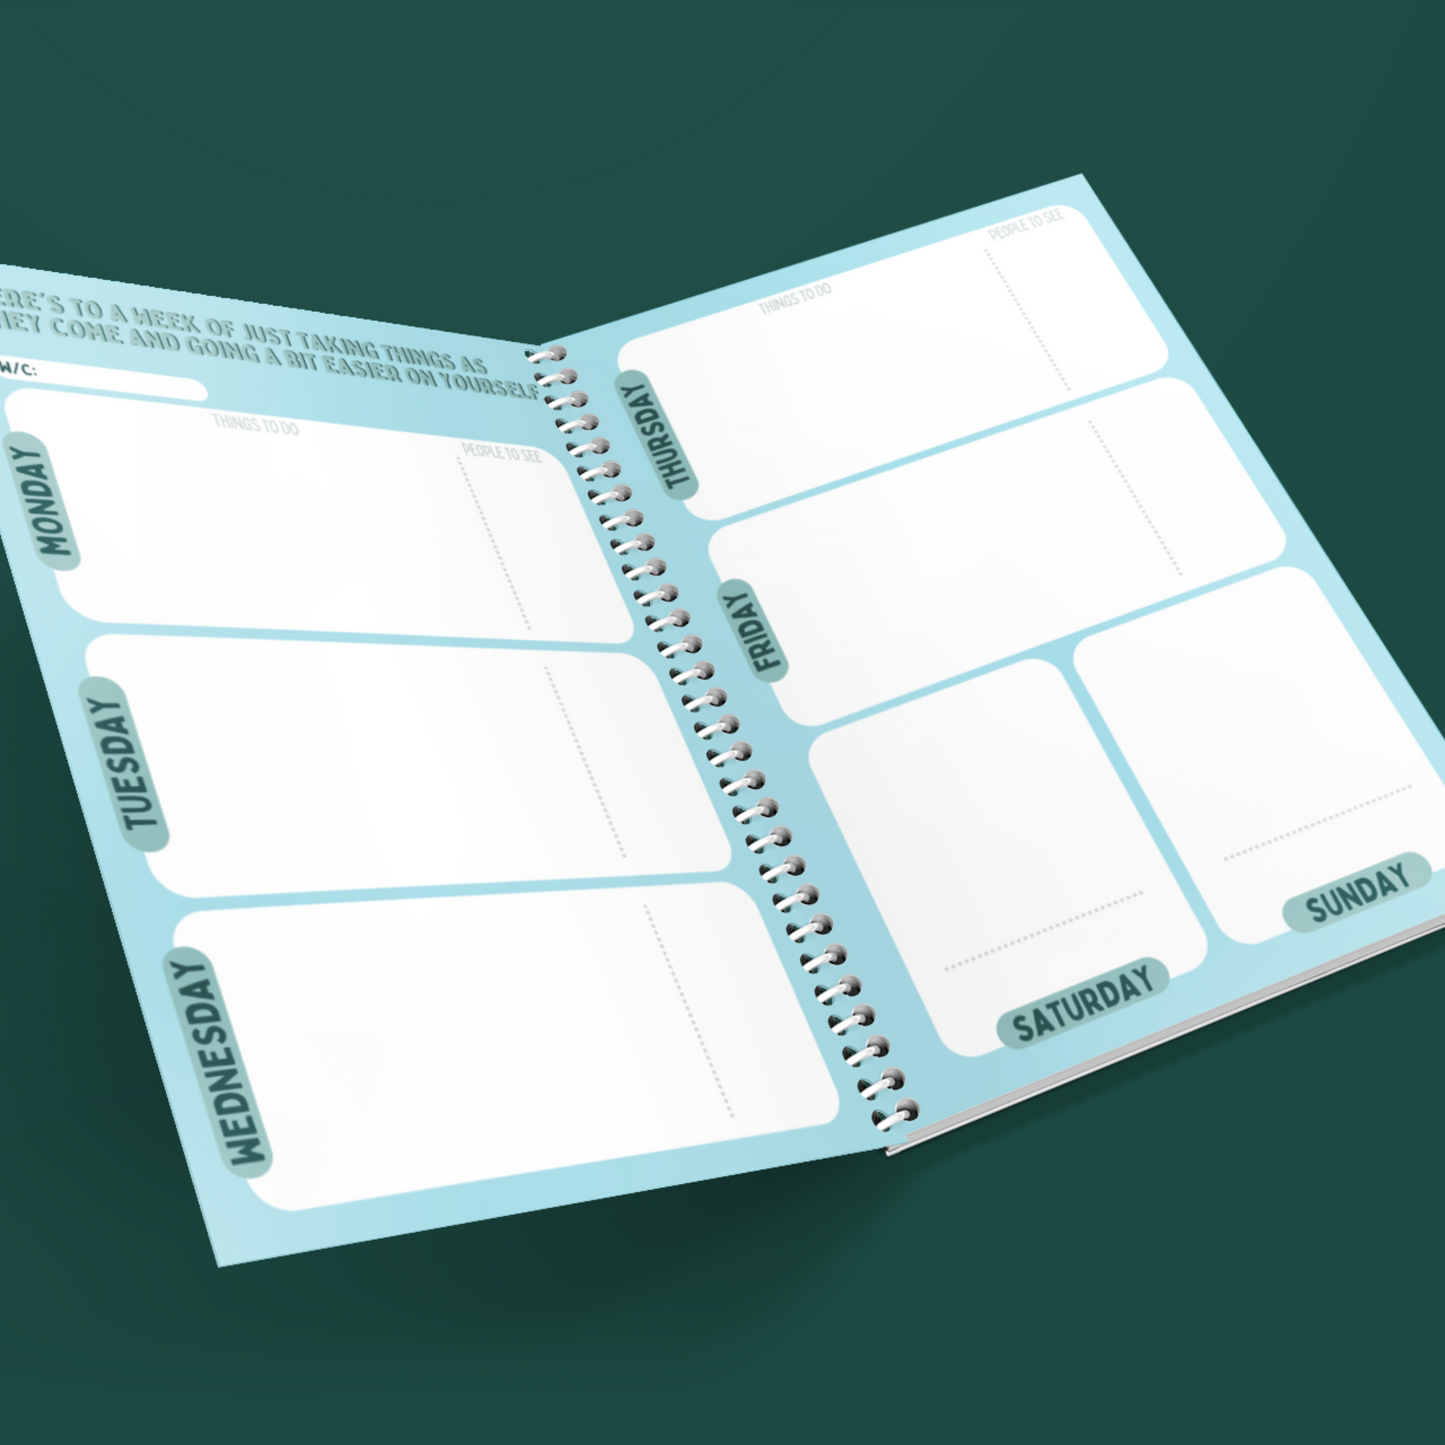 THINGS TO DO PEOPLE TO SEE PLANNER- NOW £6.00 AT CHECKOUT